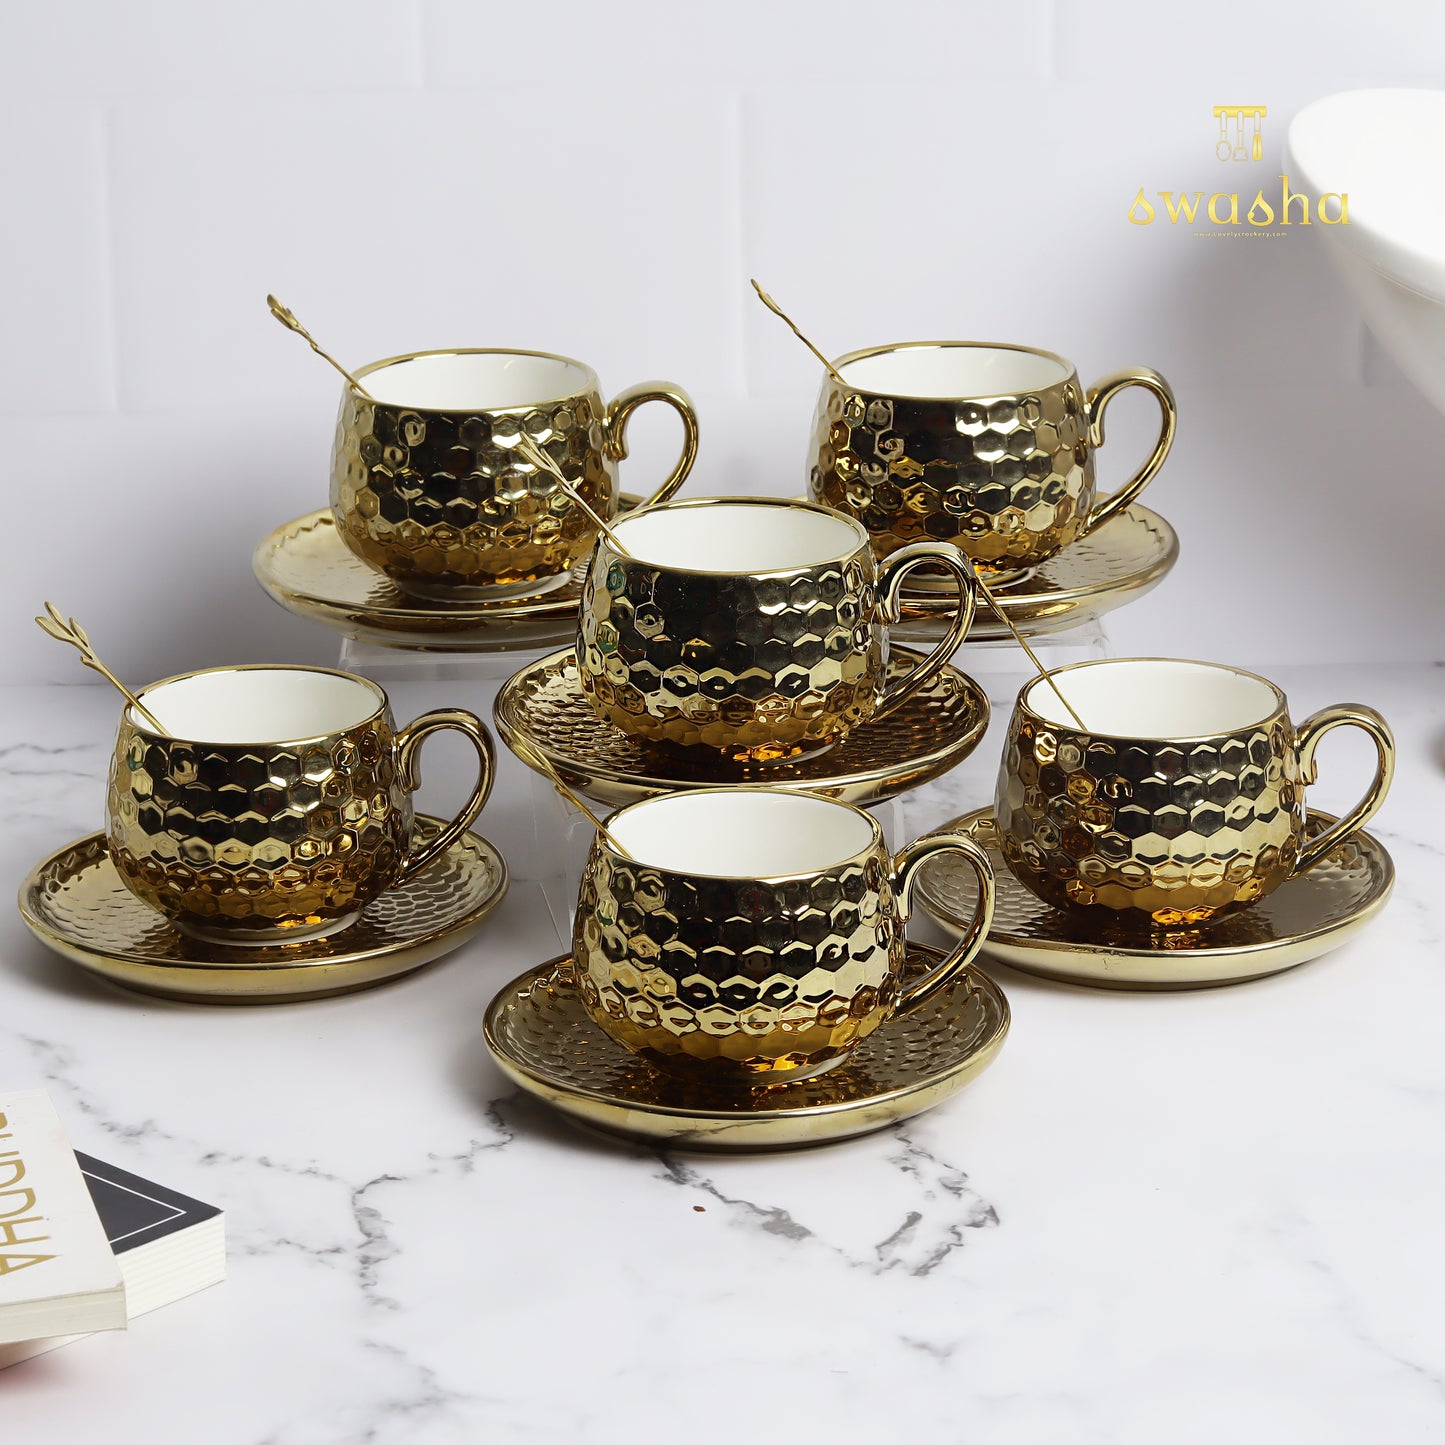 Set of 6 elegant cup and saucer pairs - perfect for refined tea or coffee moments